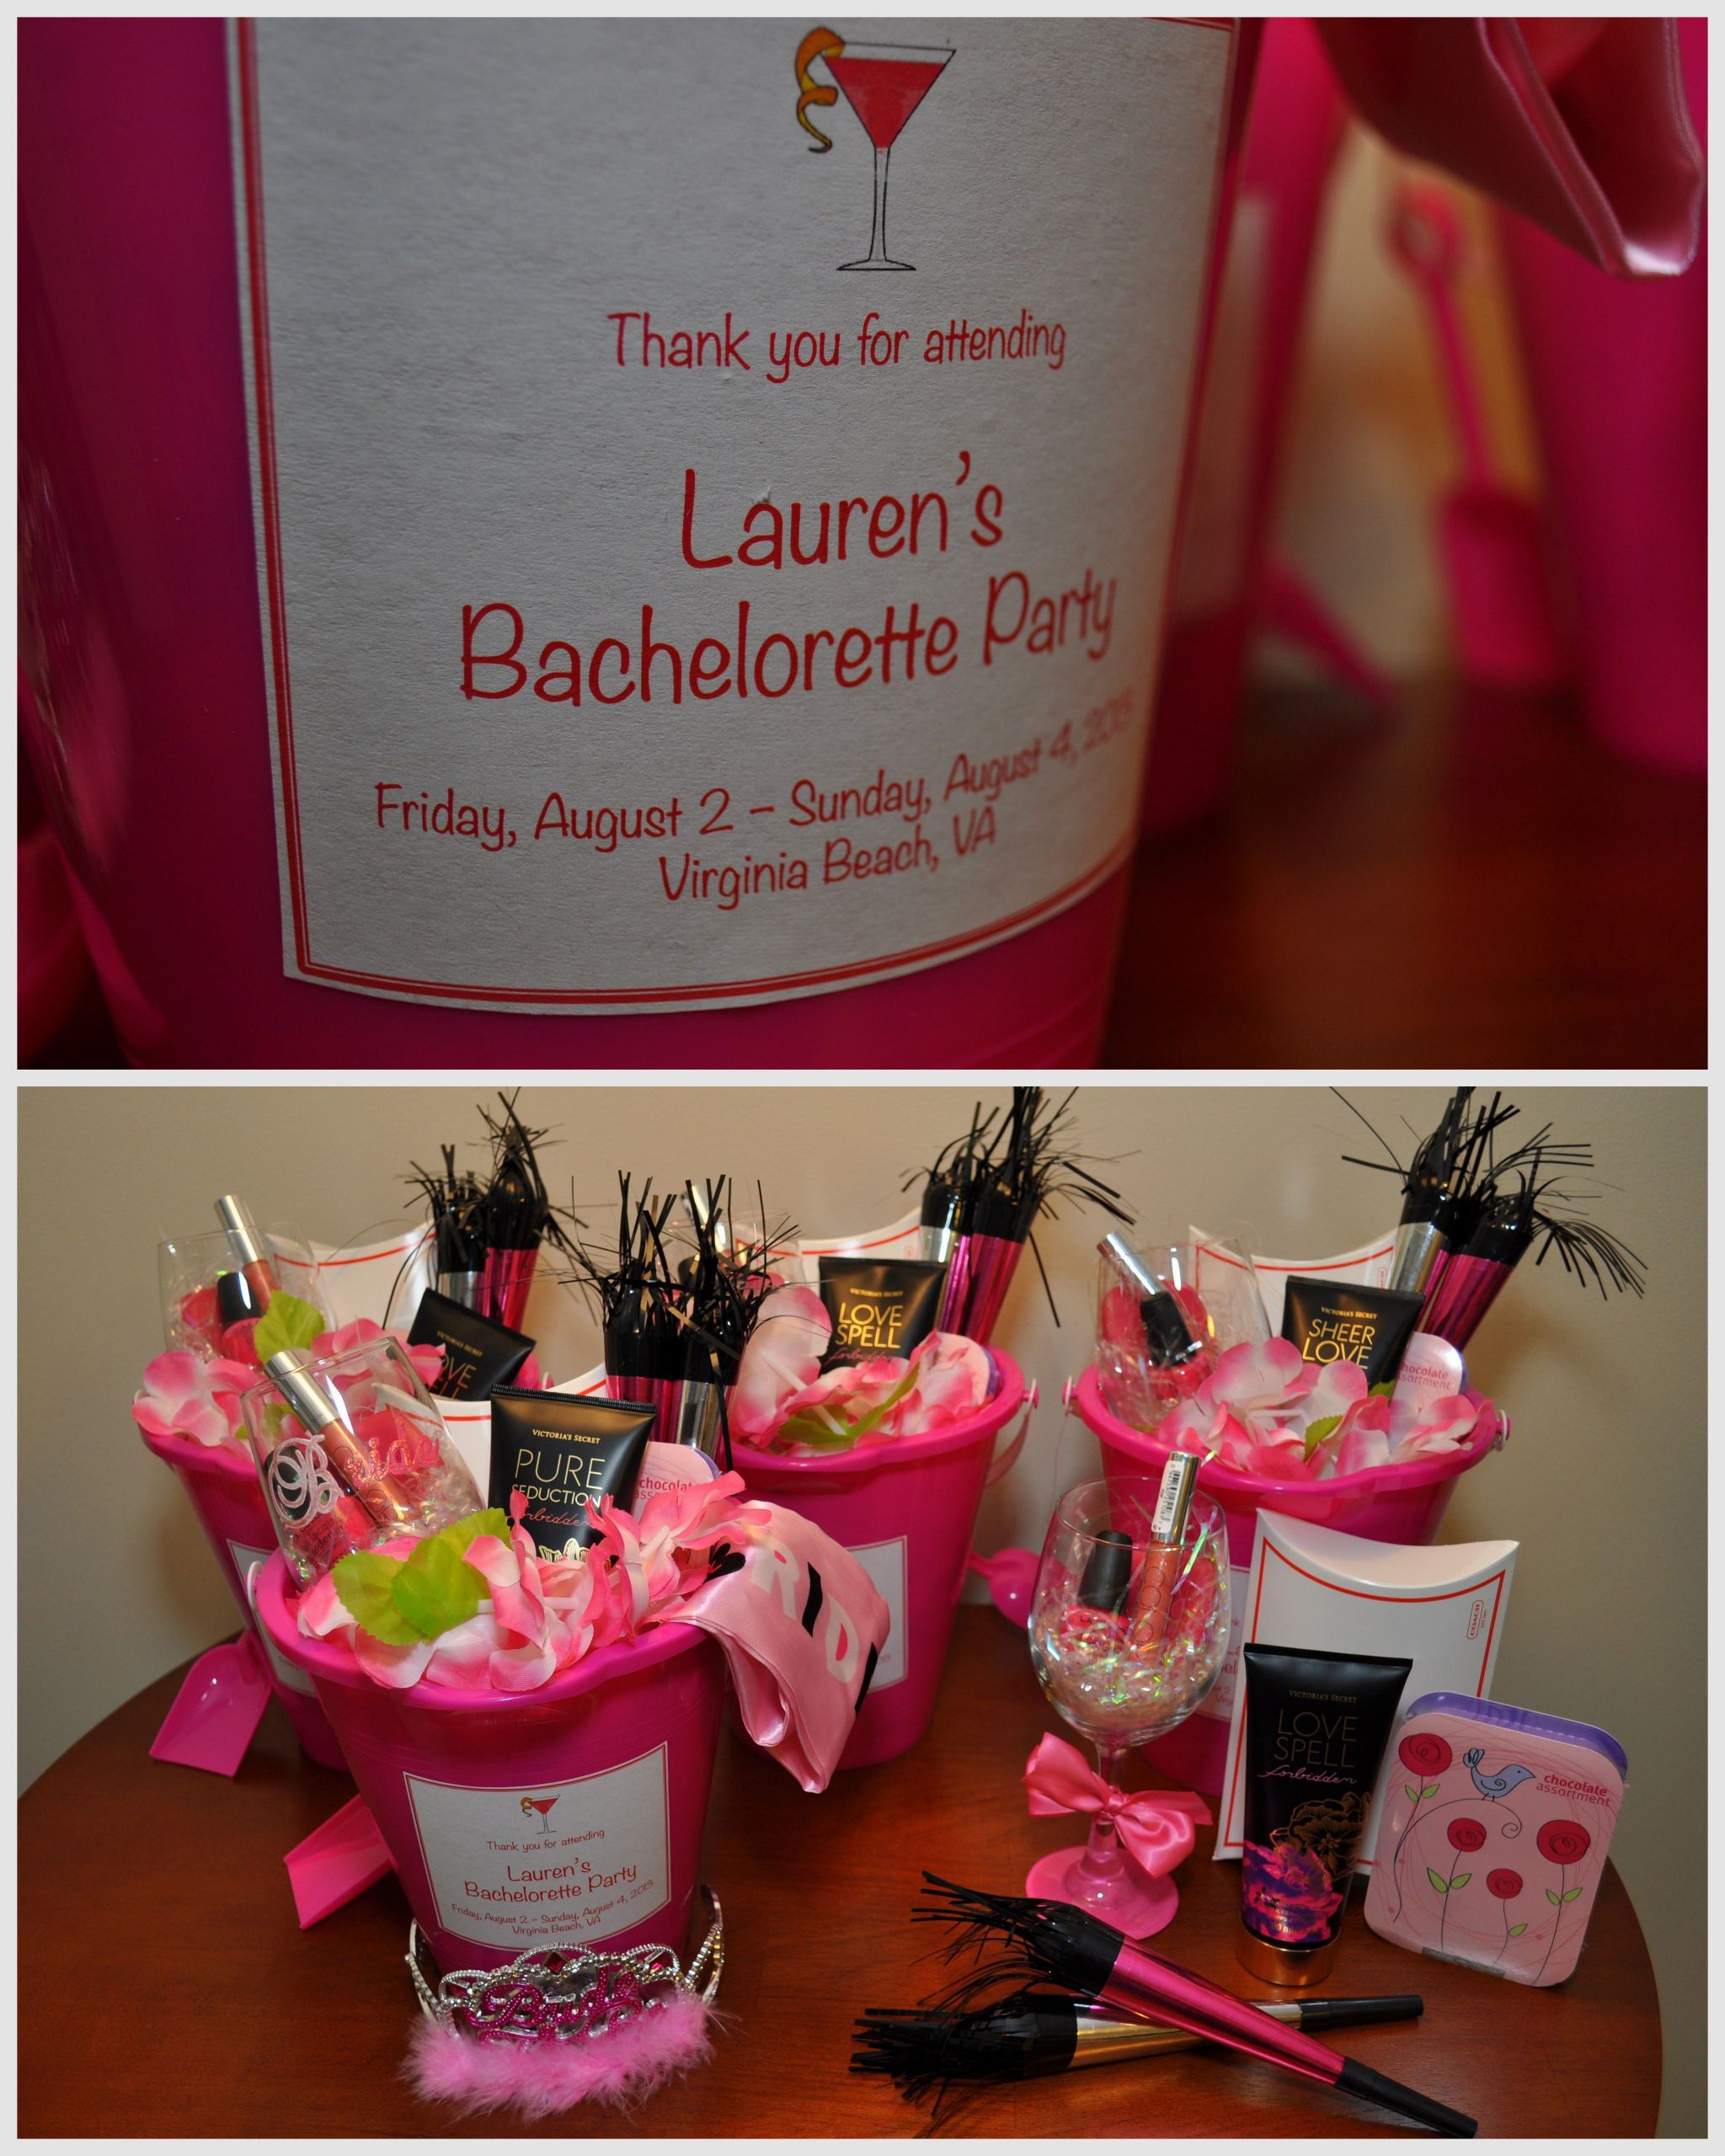 Bachelorette Party Goodie Bag Ideas
 Wel e ts goo bags for my sister and all her guests